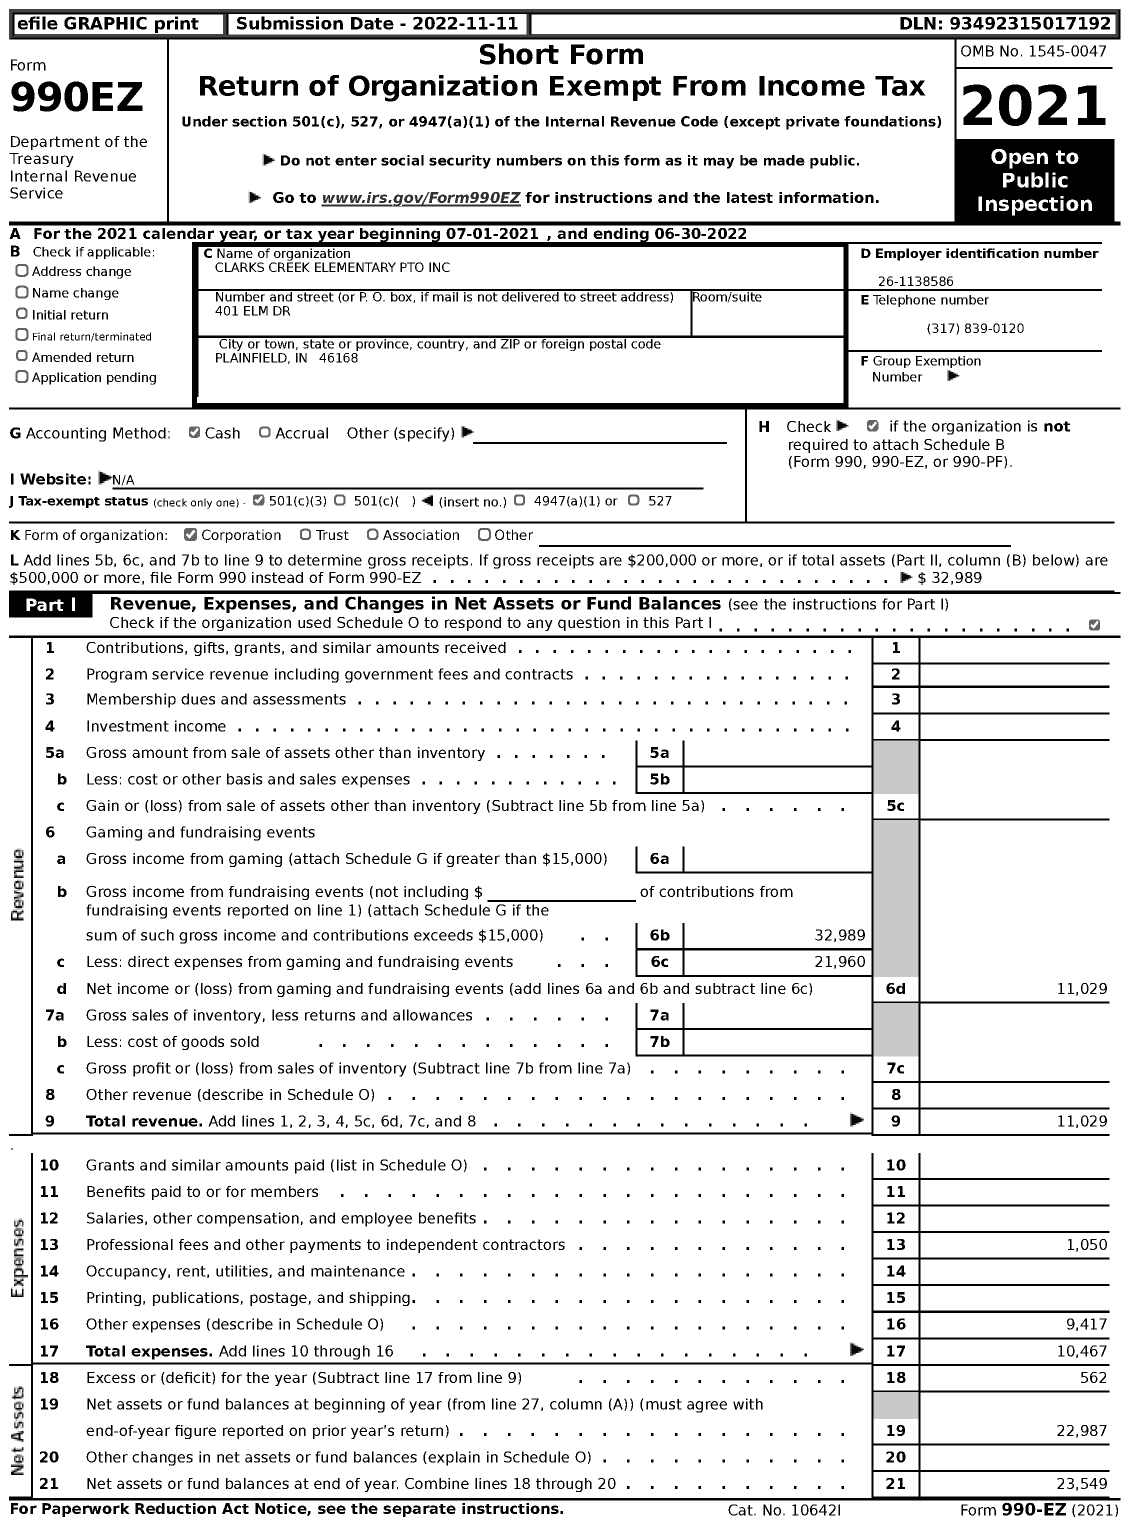 Image of first page of 2021 Form 990EZ for Clarks Creek Elementary Pto